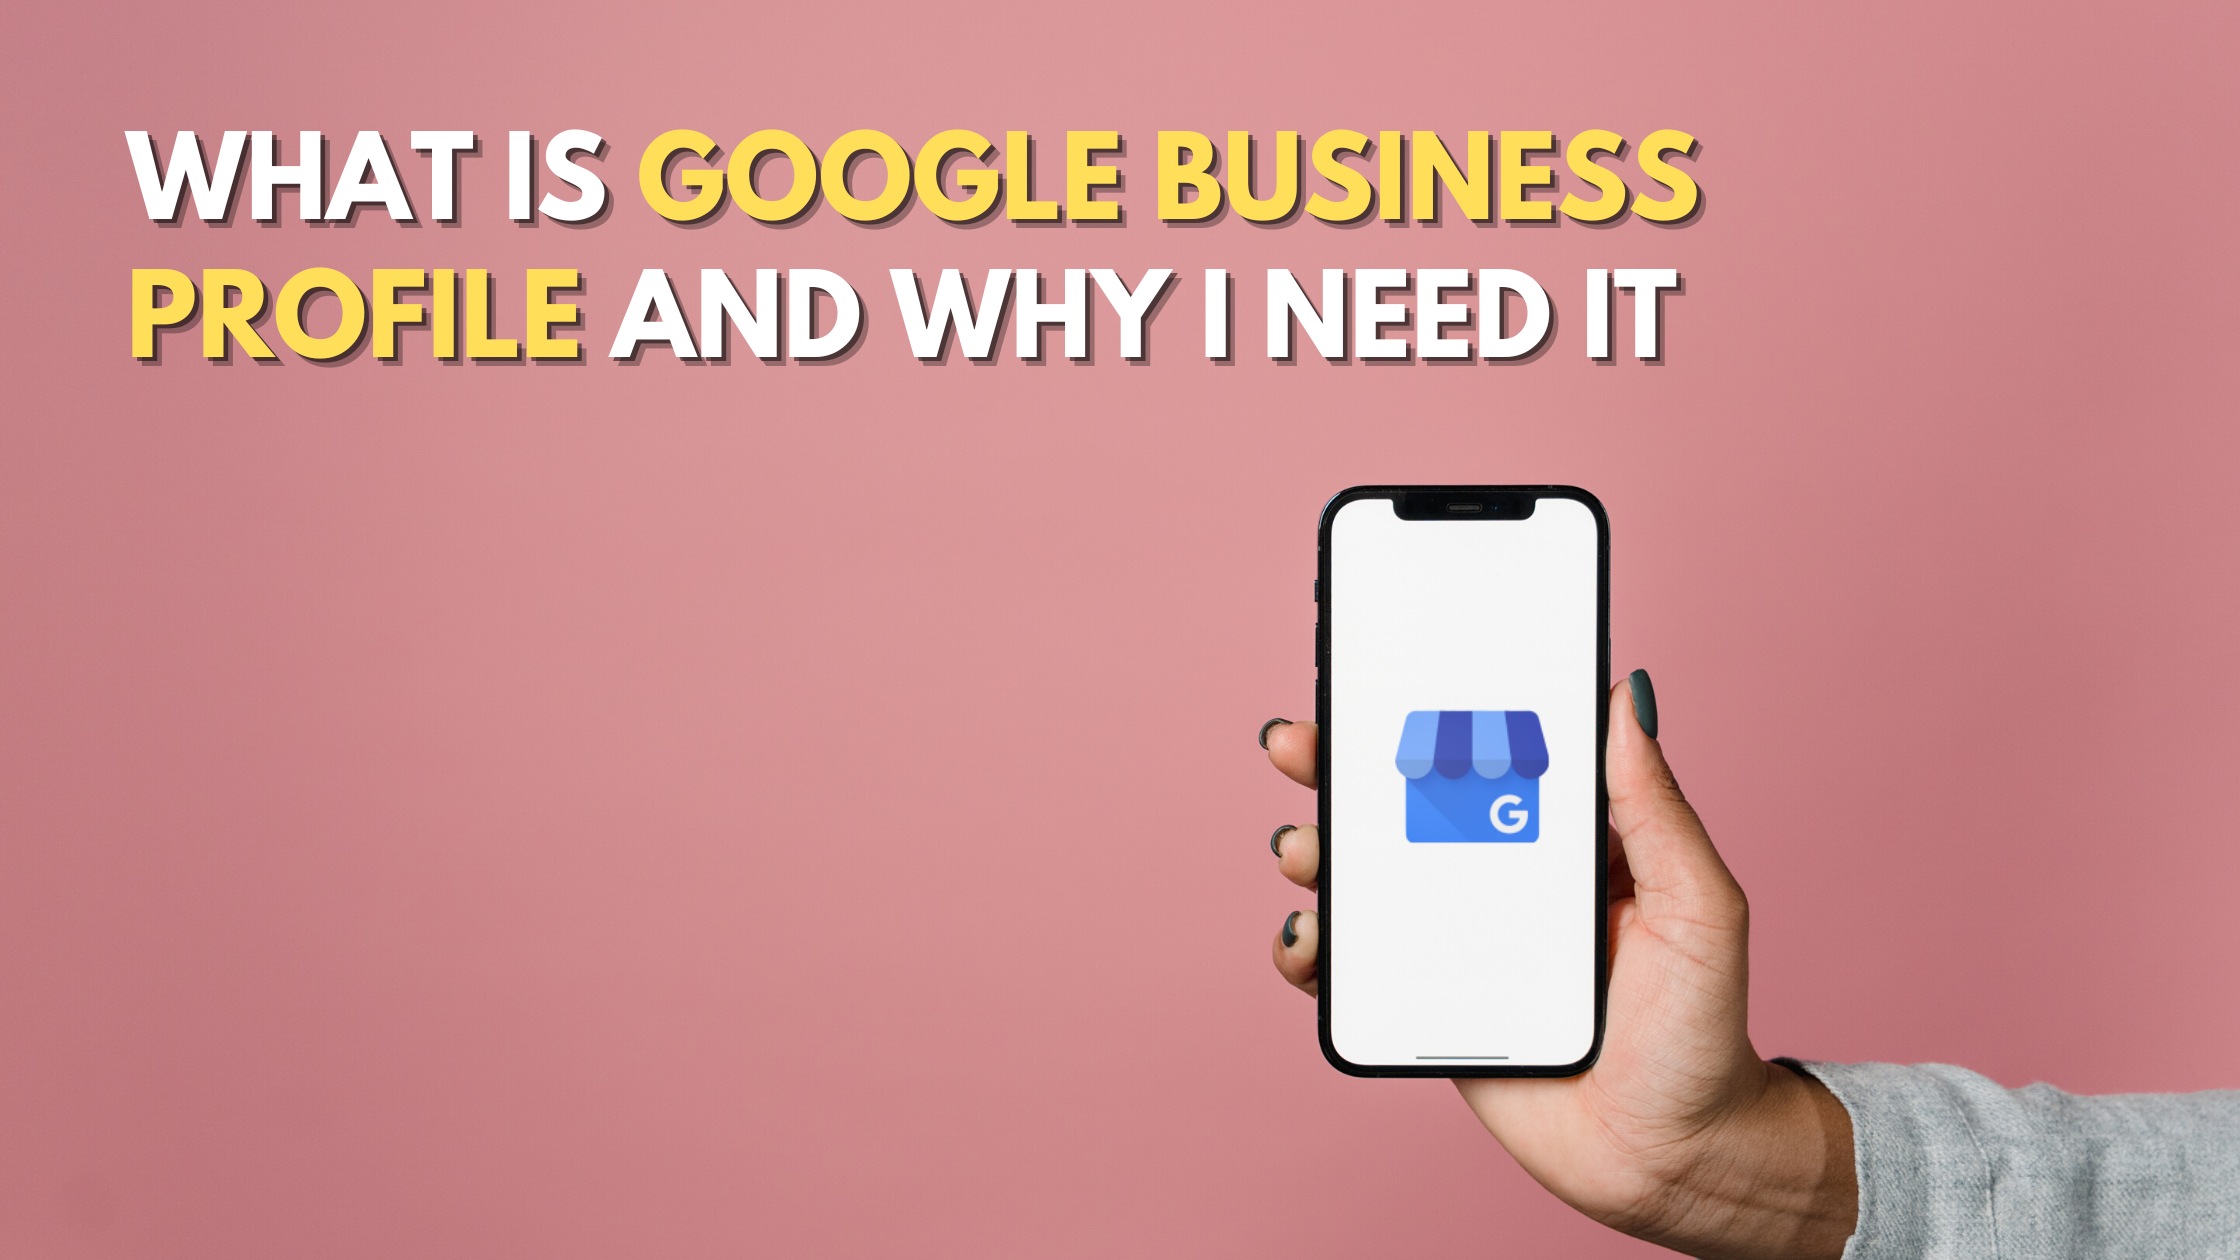 What Is Google Business Profile And Why I Need It?